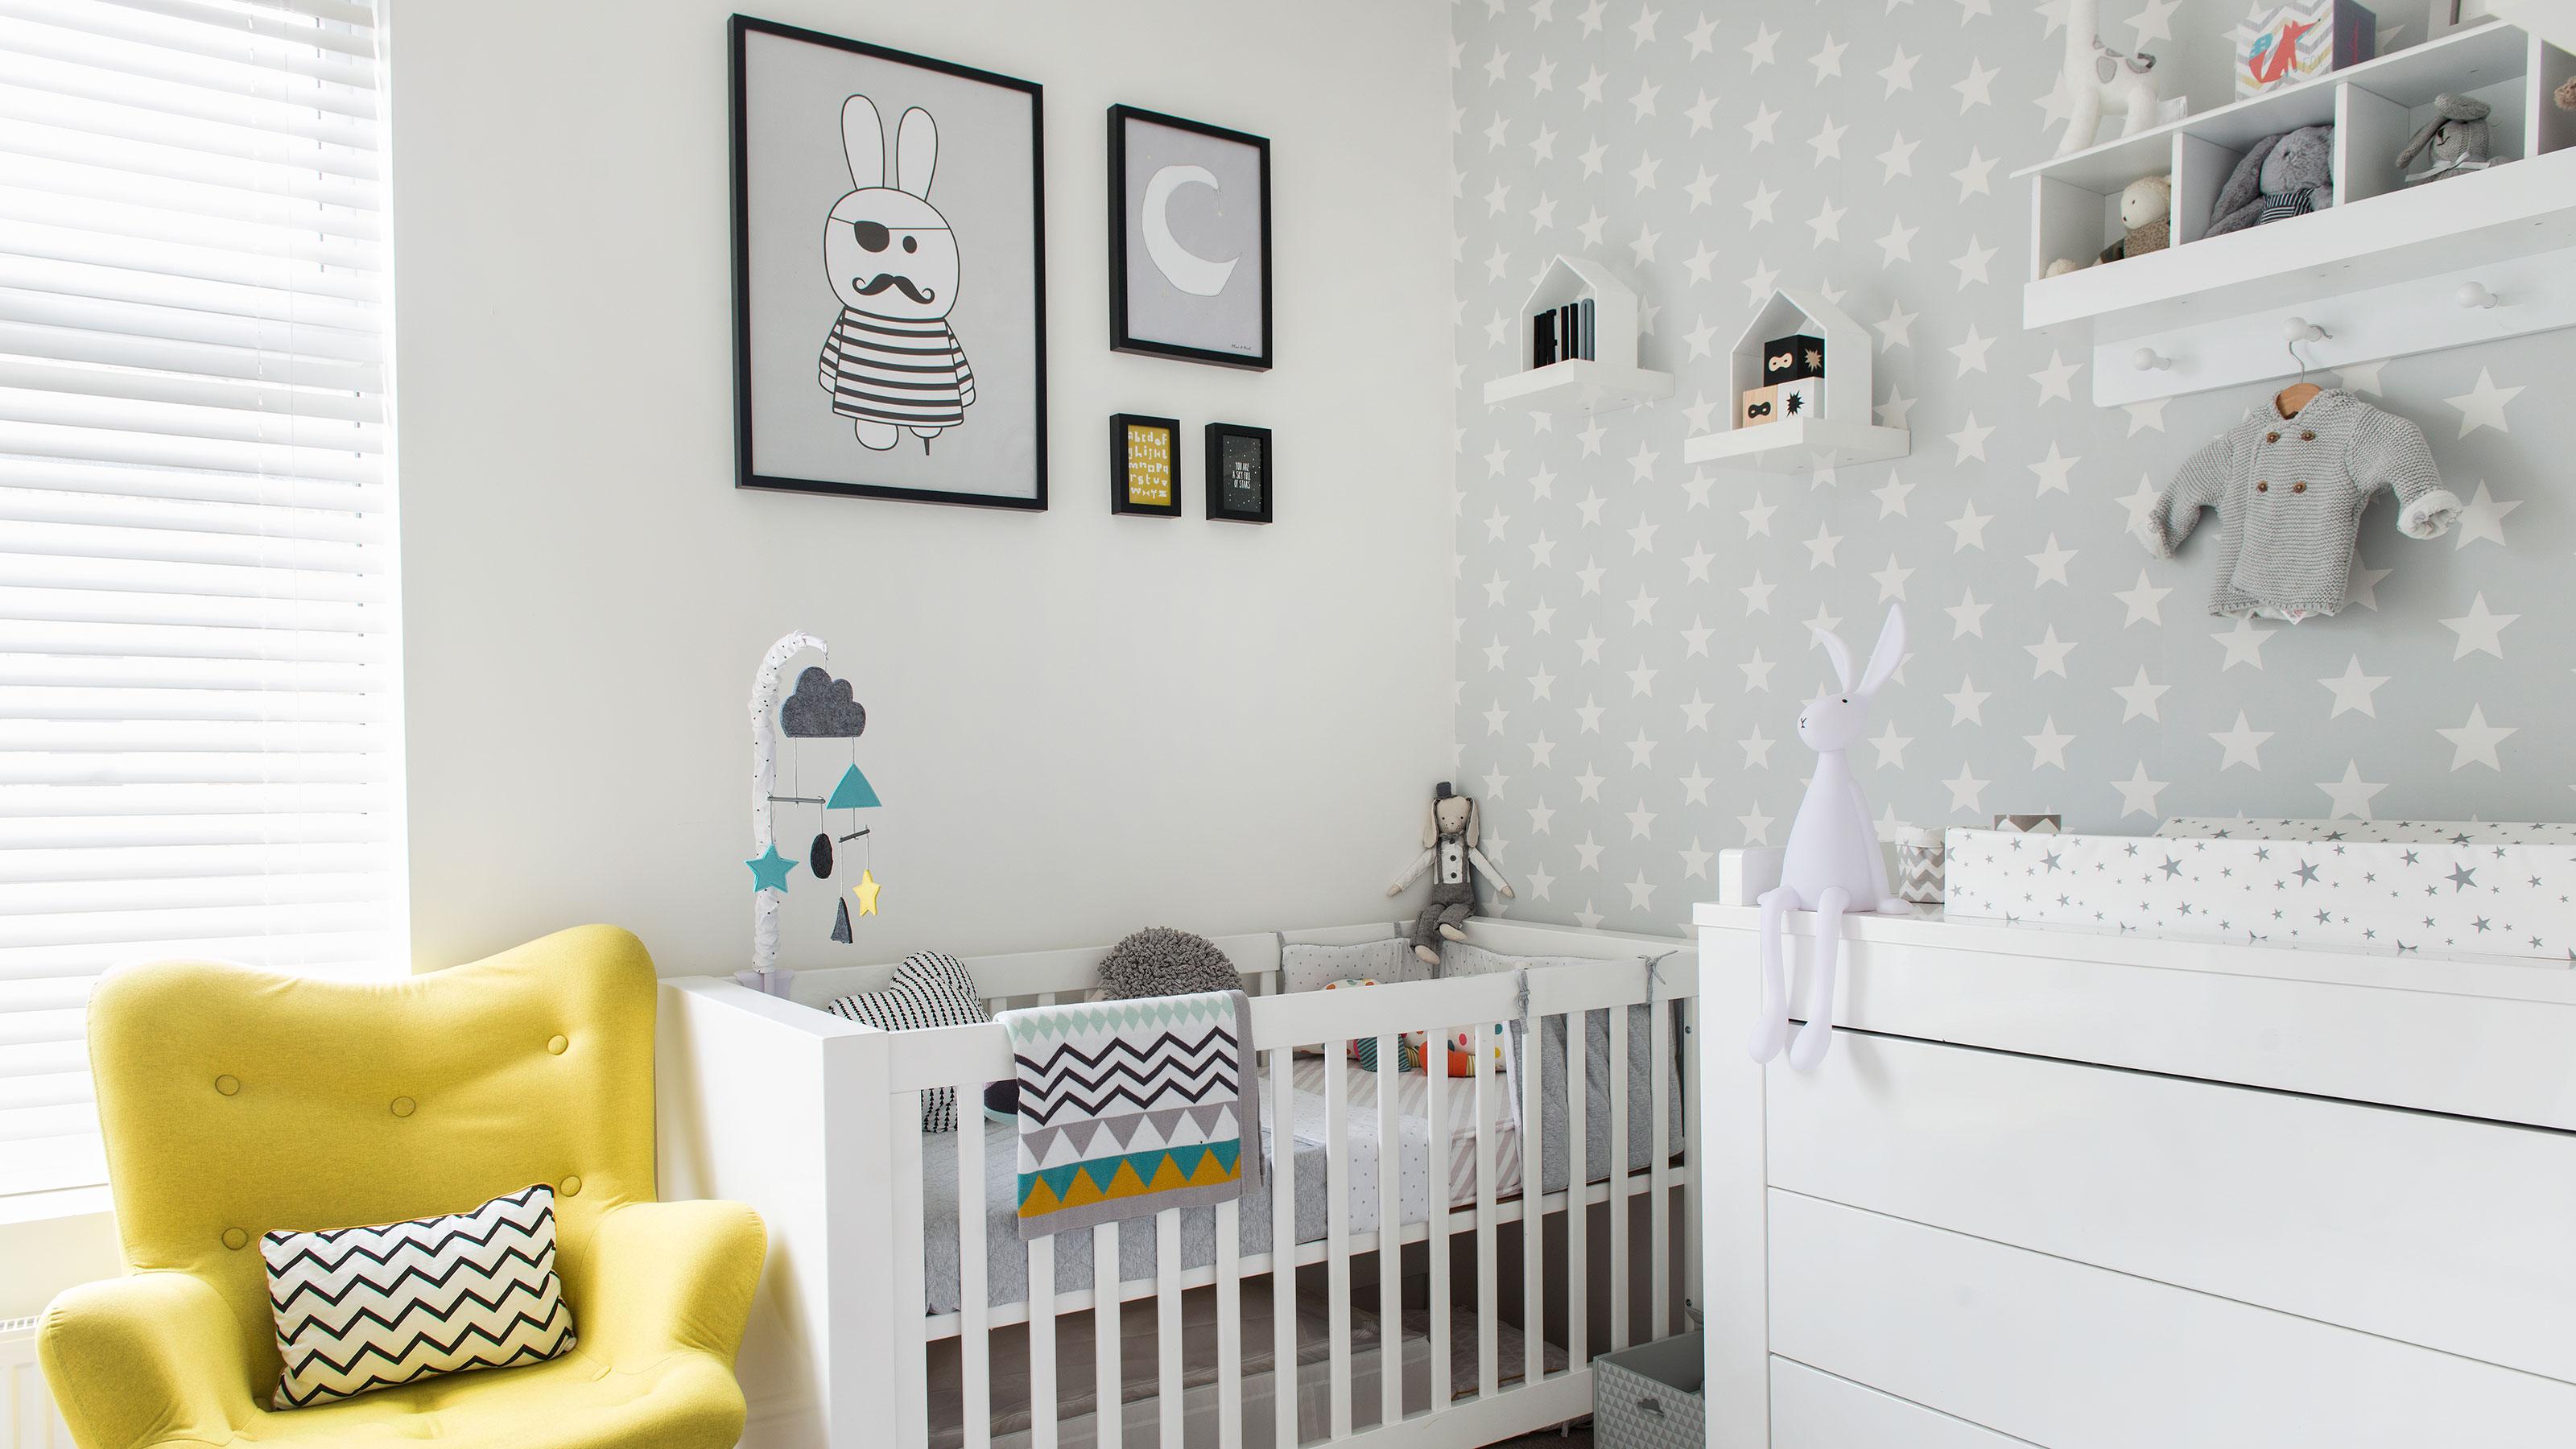 Pictures for Childrens Bedroom Baby Room Decor Grey and Yellow Nursery Prints 